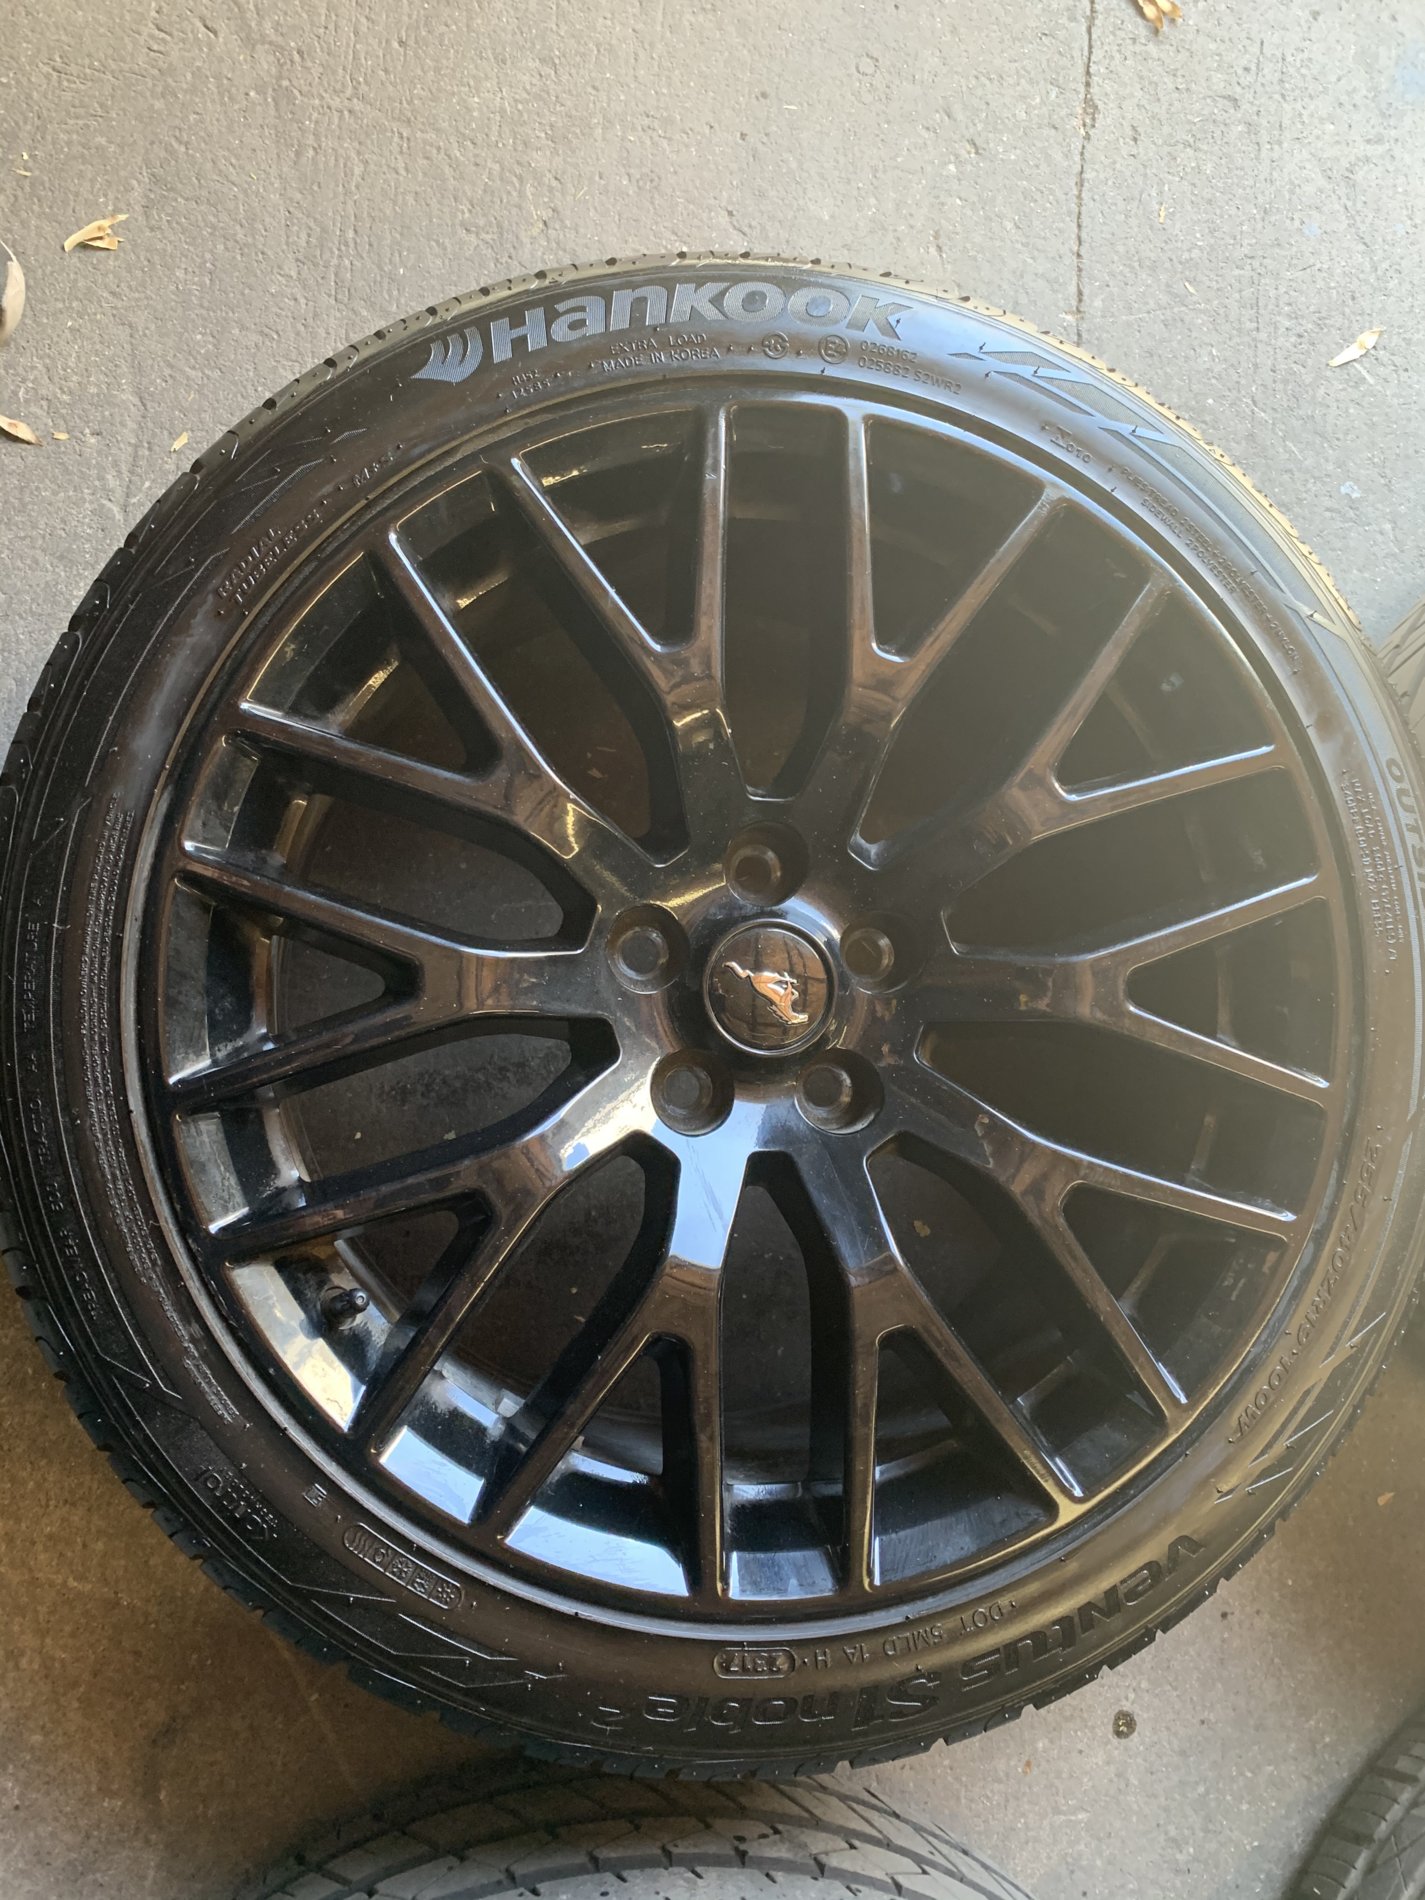 2017 Ford Mustang GT Rims Perfomance Package | 2015+ S550 Mustang Forum